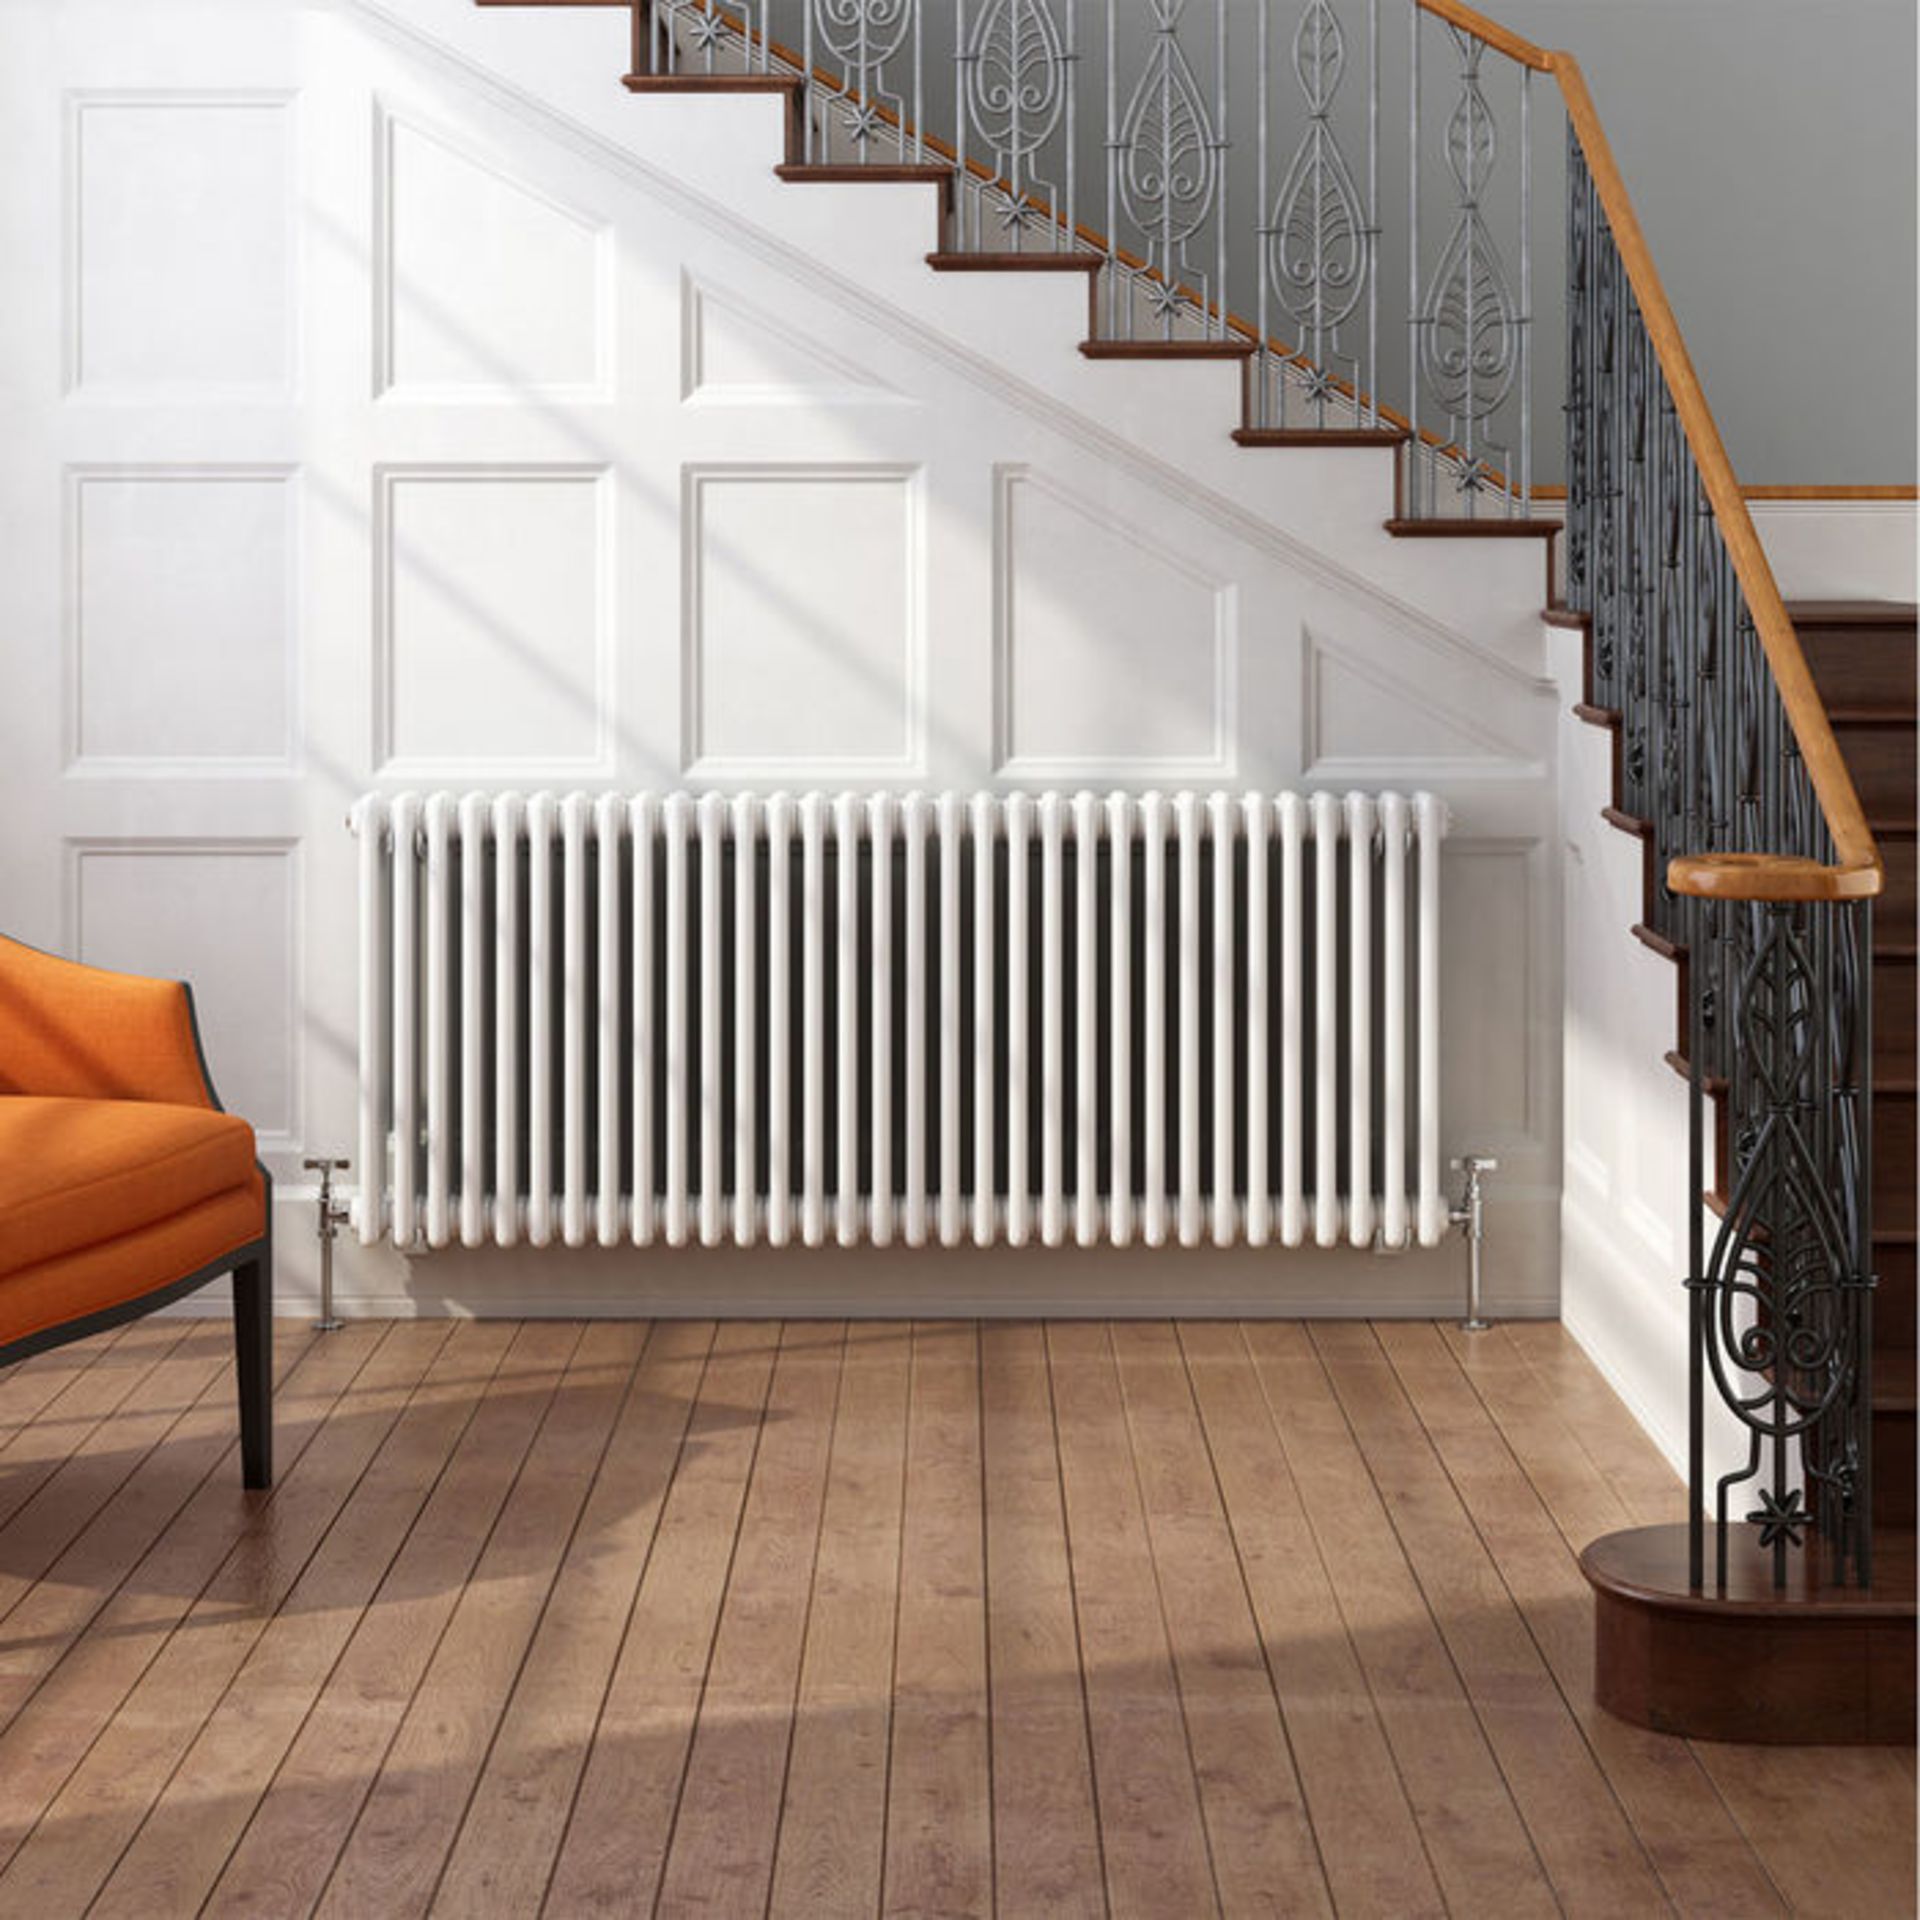 (PT7) 600x1458mm White Double Panel Horizontal Colosseum Traditional Radiator. RRP £569.99. Made - Image 2 of 5